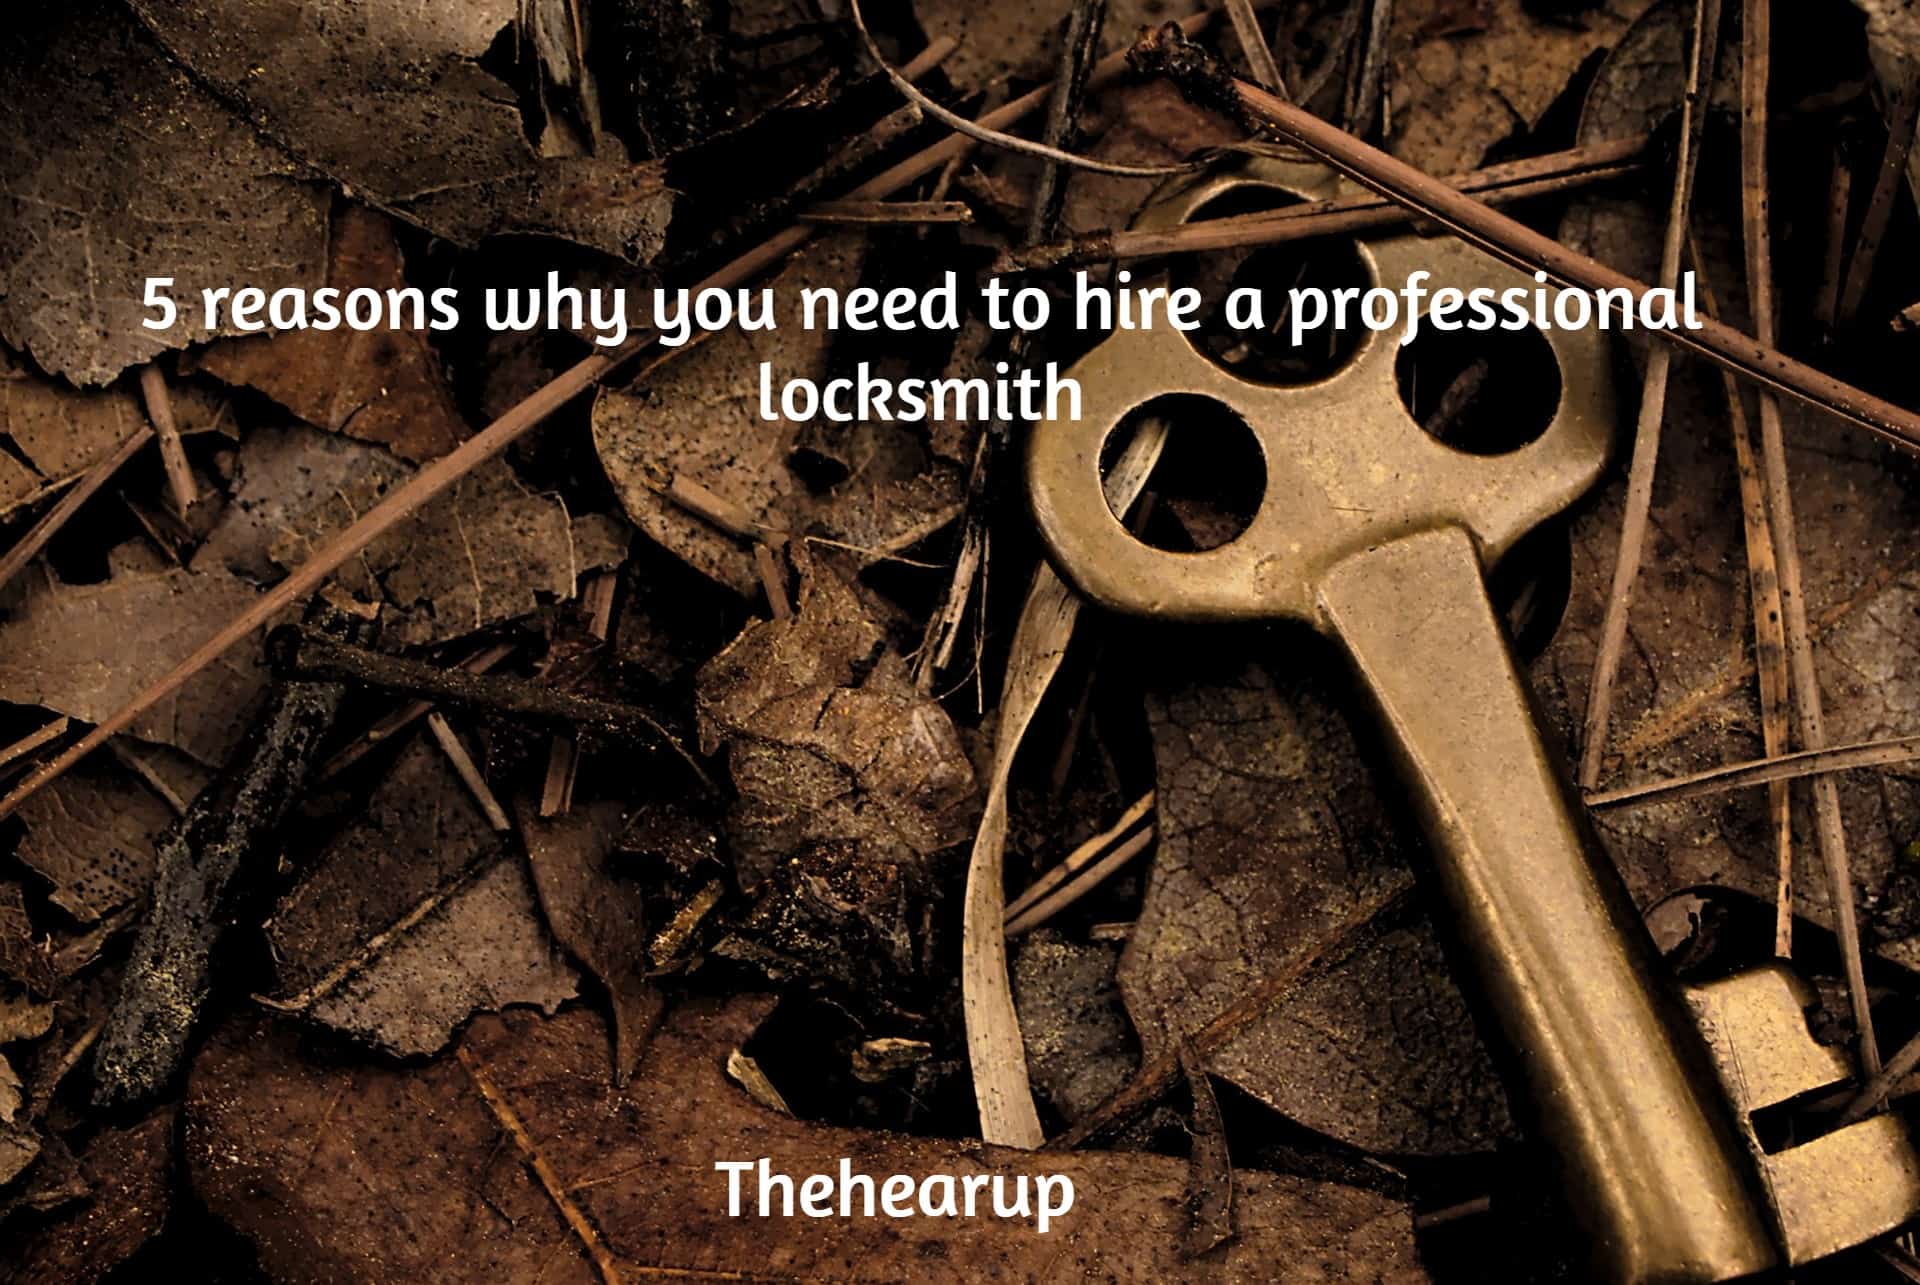 5 reasons why you need to hire a professional locksmith